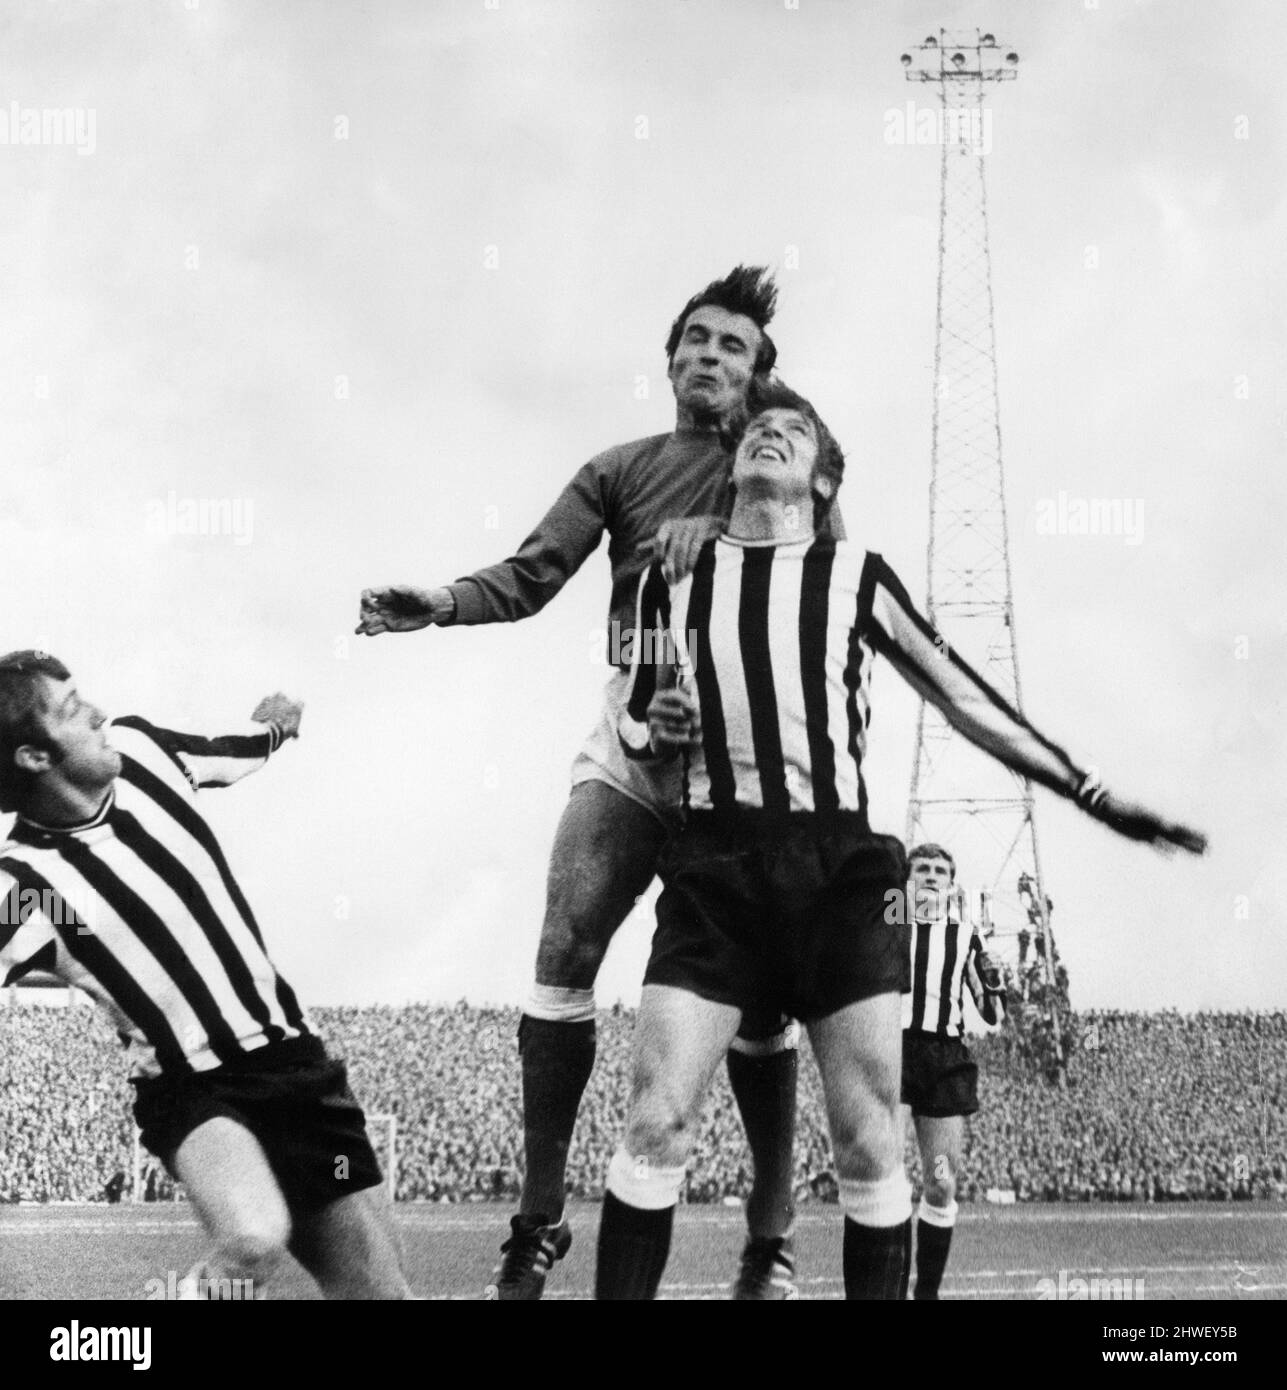 Newcastle United 2-0 Rangers, Inter-Cities Fairs Cup Semi Final, 2nd Leg, football match at St James Park, Wednesday 21st May 1969. Newcastle United win 2-0 on aggregate.  Our picture shows ... Frank Clark, Newcastle Vice Captain on left. Stock Photo